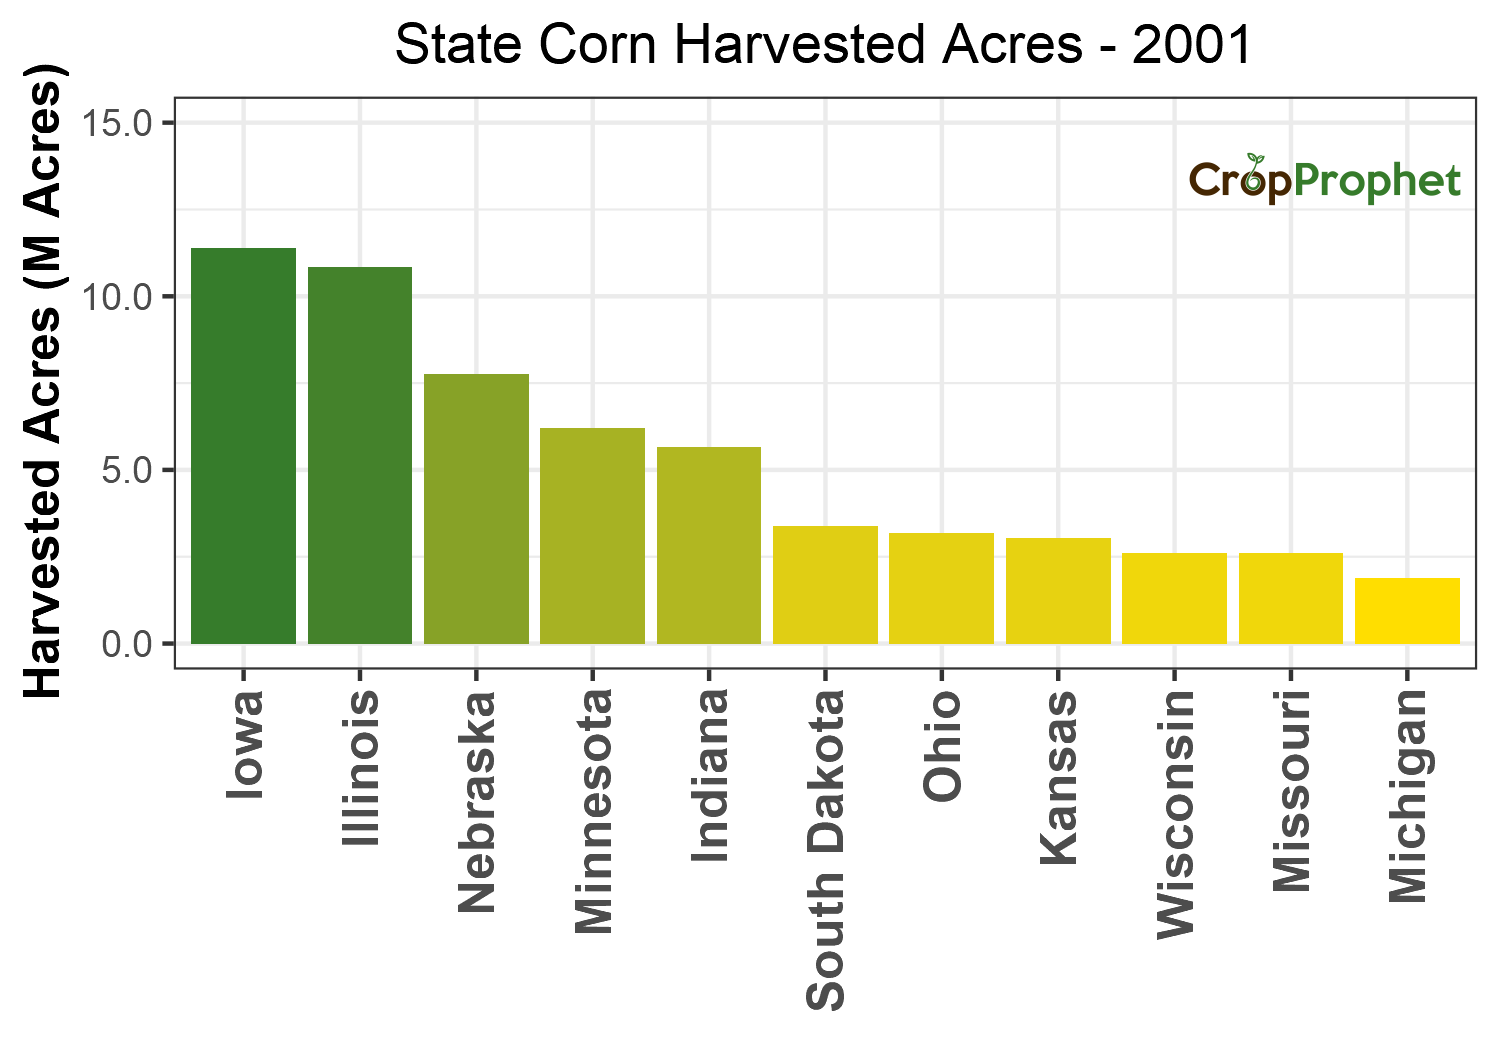 Corn Harvested Acres by State - 2001 Rankings